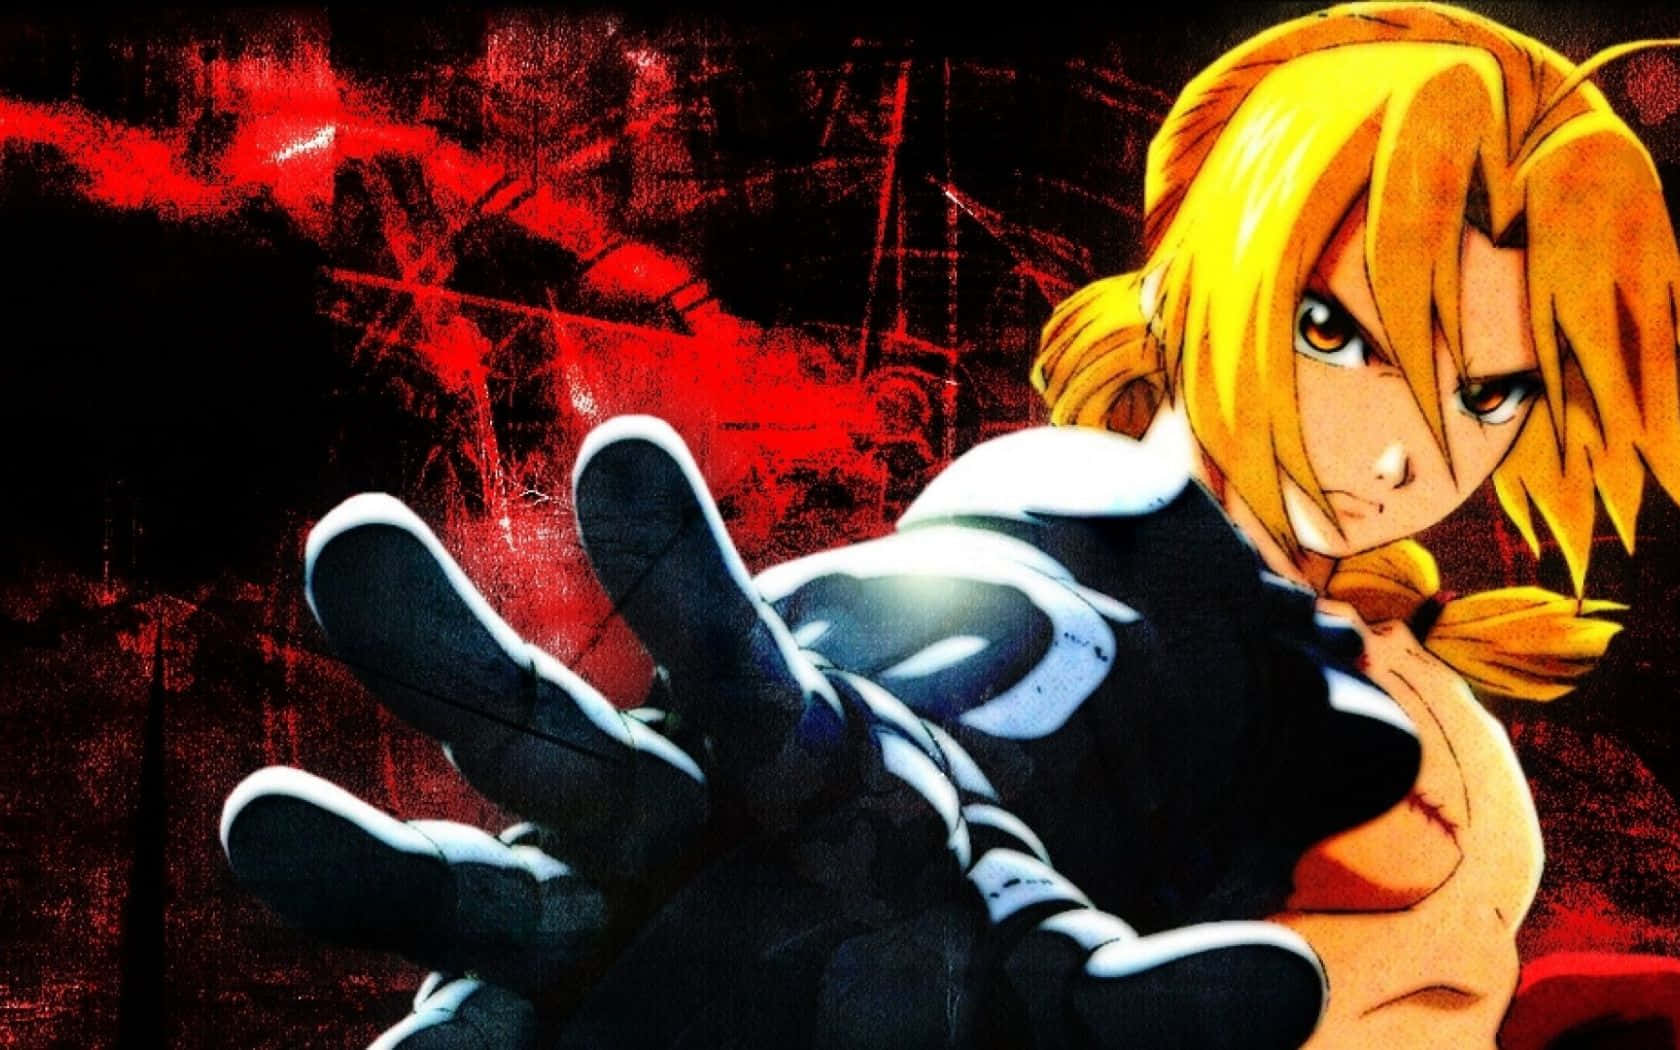 Anime FullMetal Alchemist Picture - Image Abyss